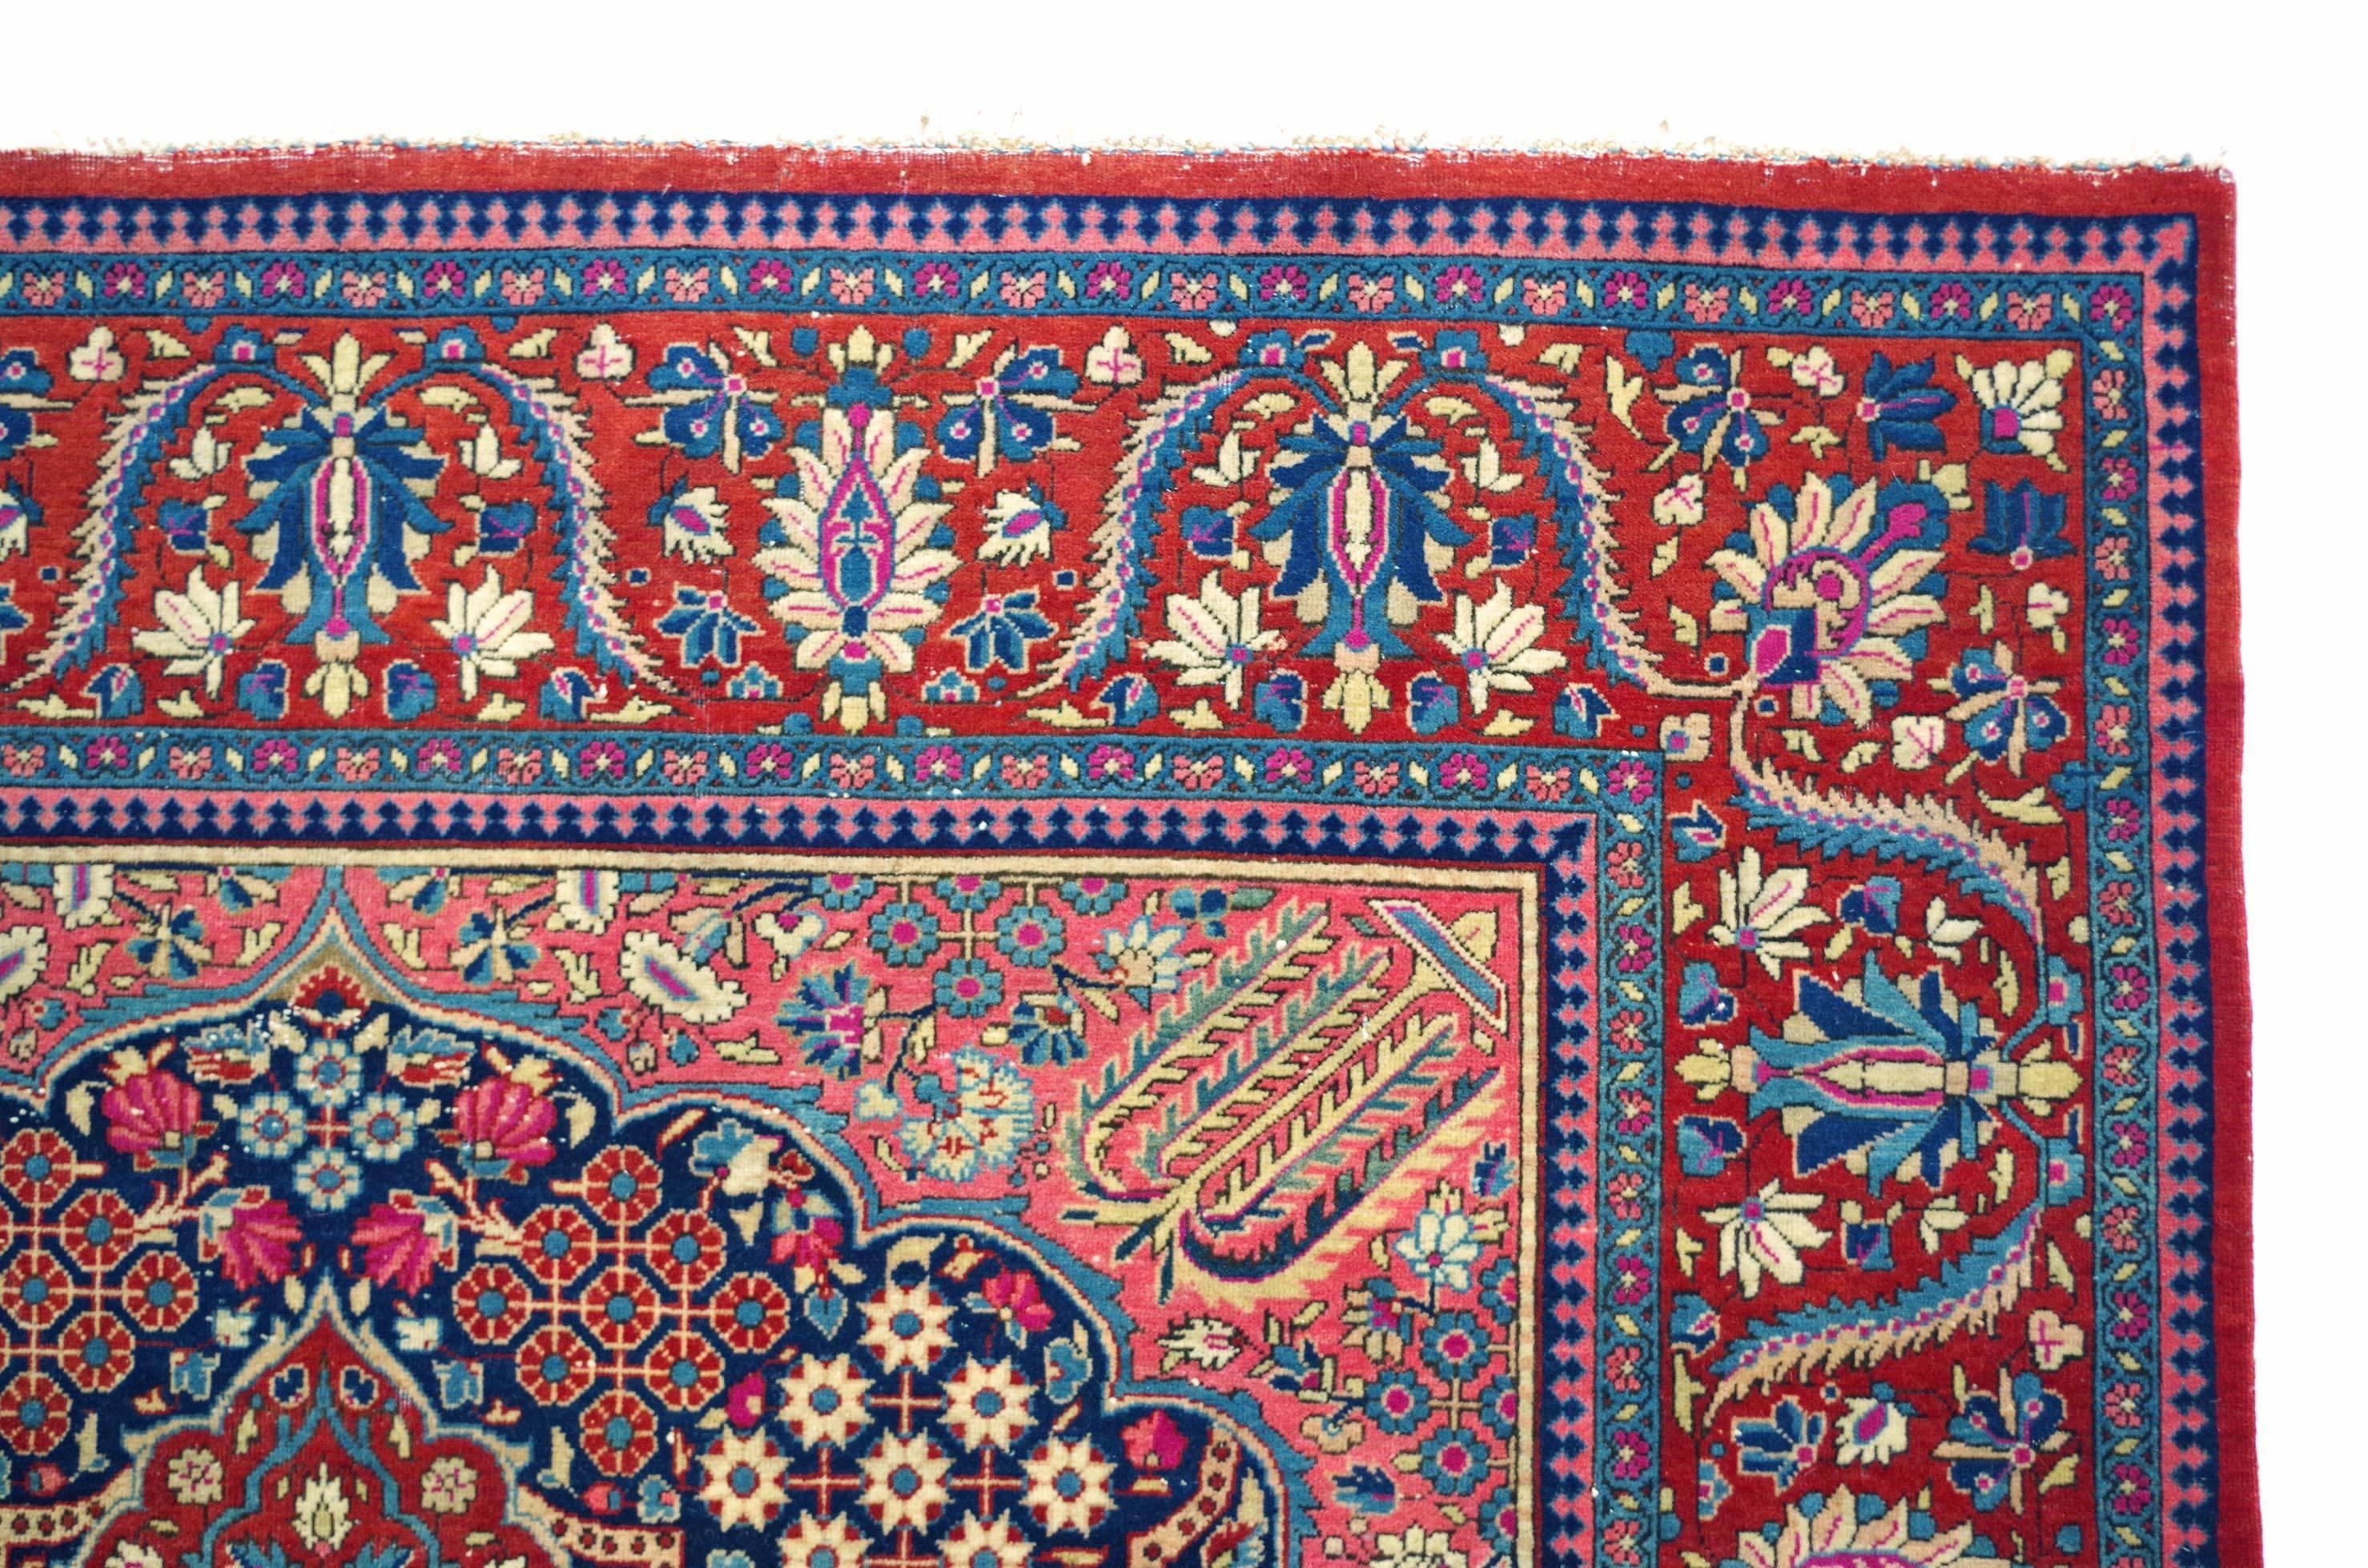 Woven with fine Kirk wool, containing an unusual purple dye. A classic fine-quality turn of the century Kashan. Kashan, Central Persia, circa 1900. Cotton warp and weft, woollen pile. Very good condition, no repairs.